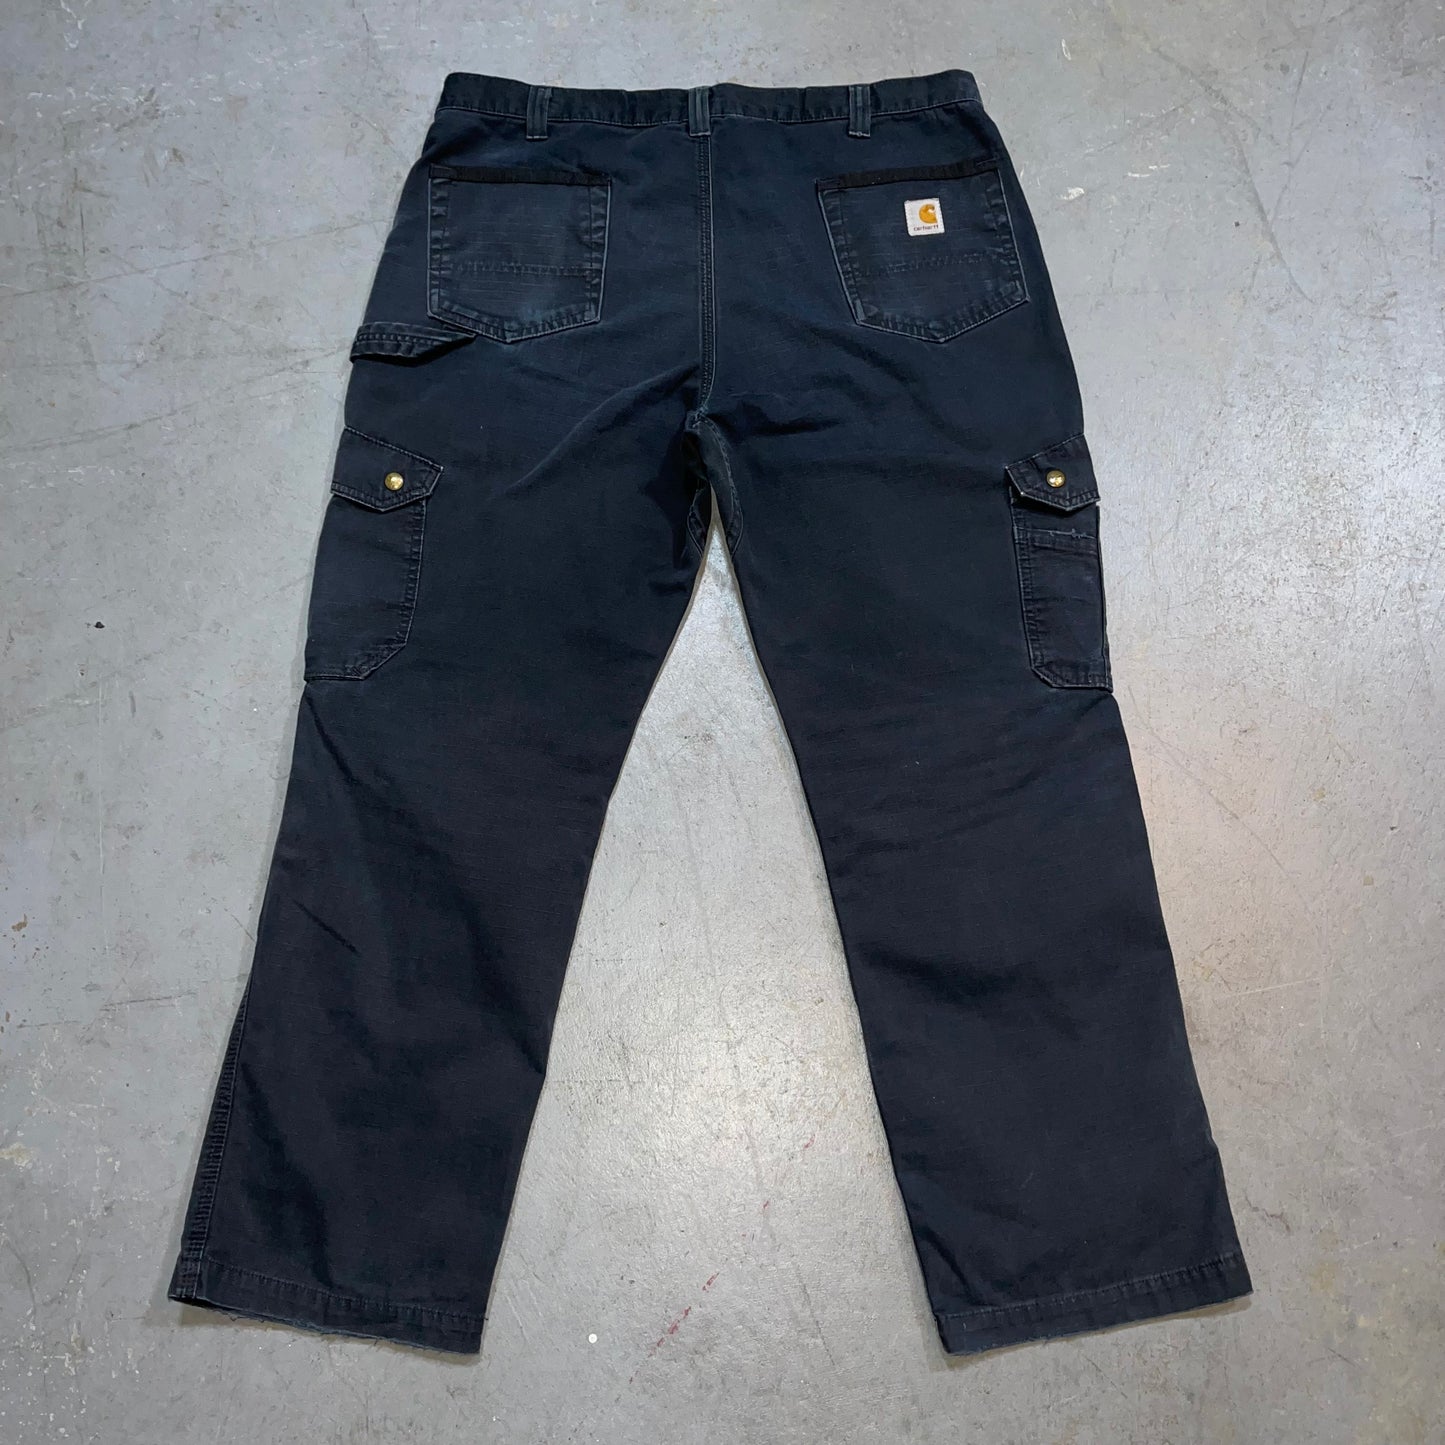 Y2K Carhartt Relaxed Fit Cargo Pants. Size 38x30